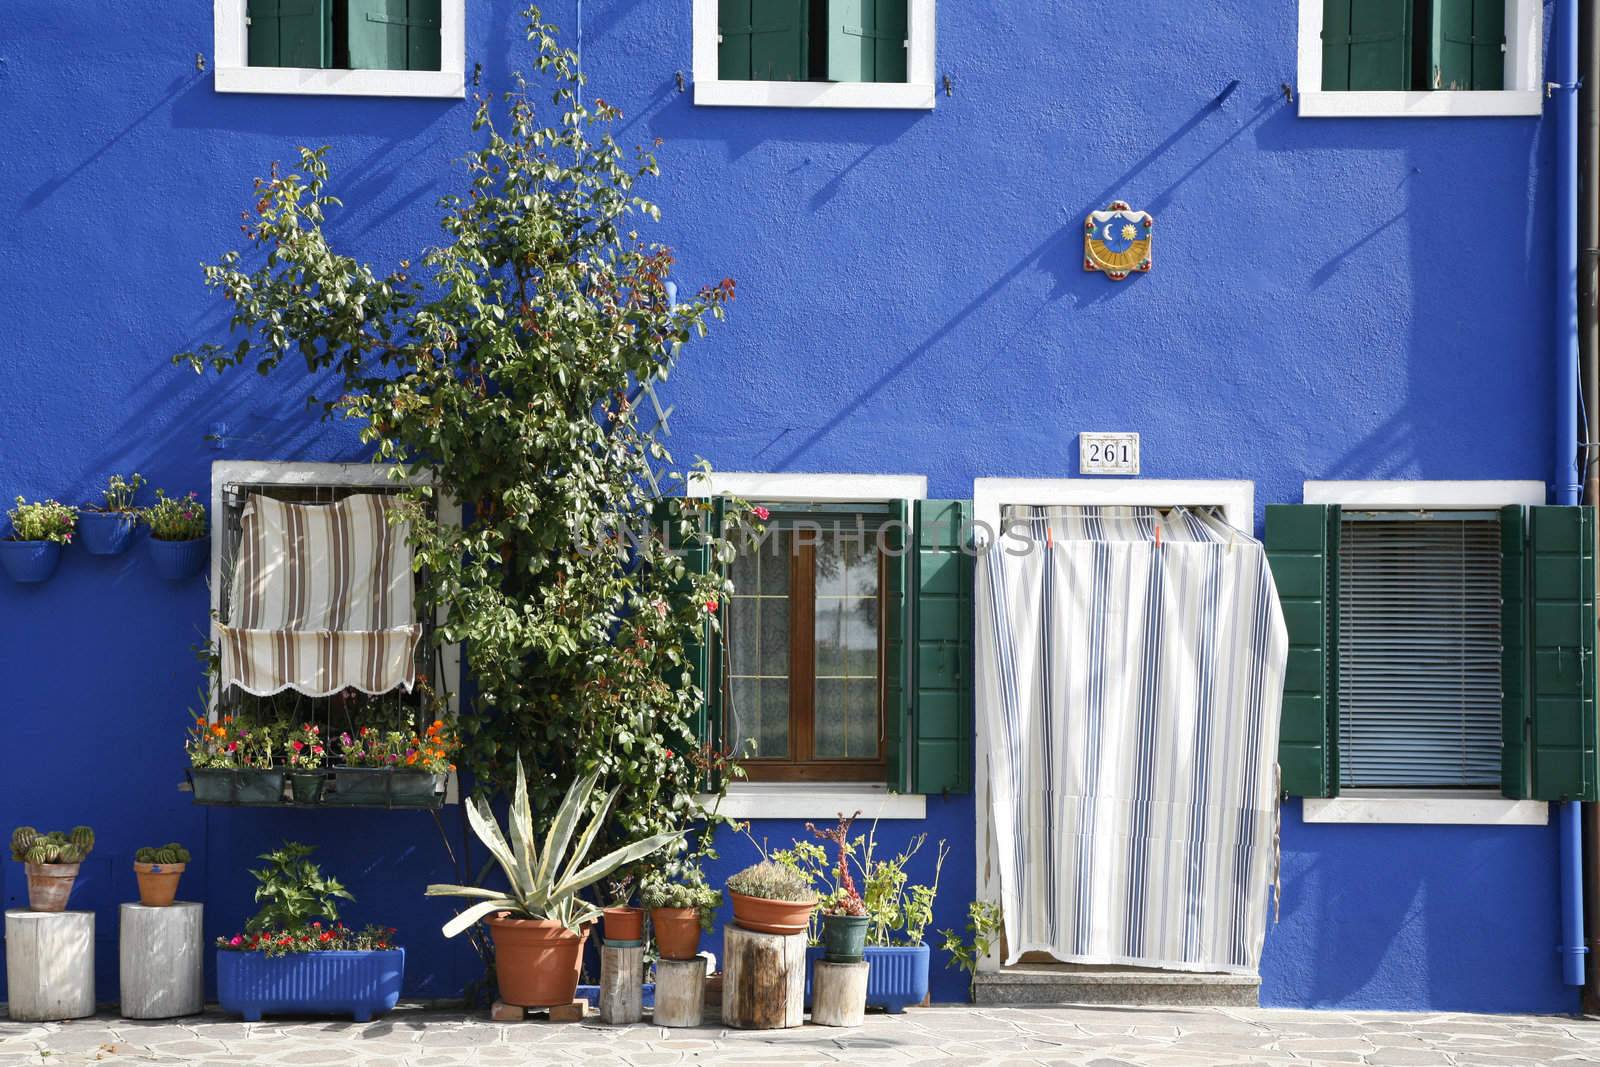 Colorful house on the island of Burano in the Venetian lagoon - Italy.